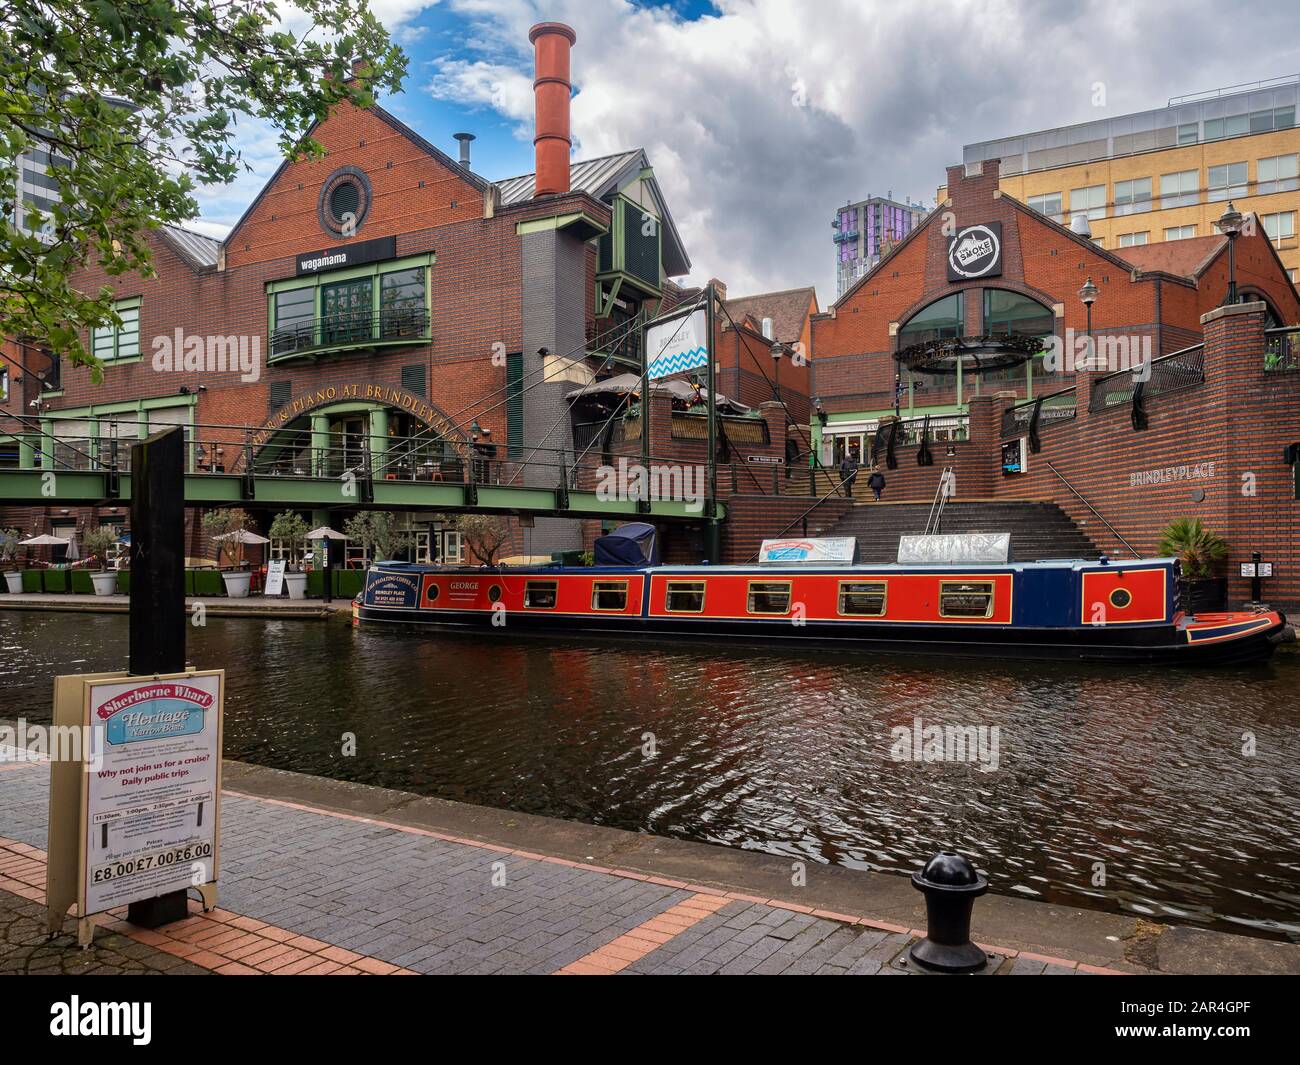 BIRMINGHAM, UK - MAY 28, 2019:  Floating Cafe on a narrowboat on the canal at Brindley Place. Stock Photo